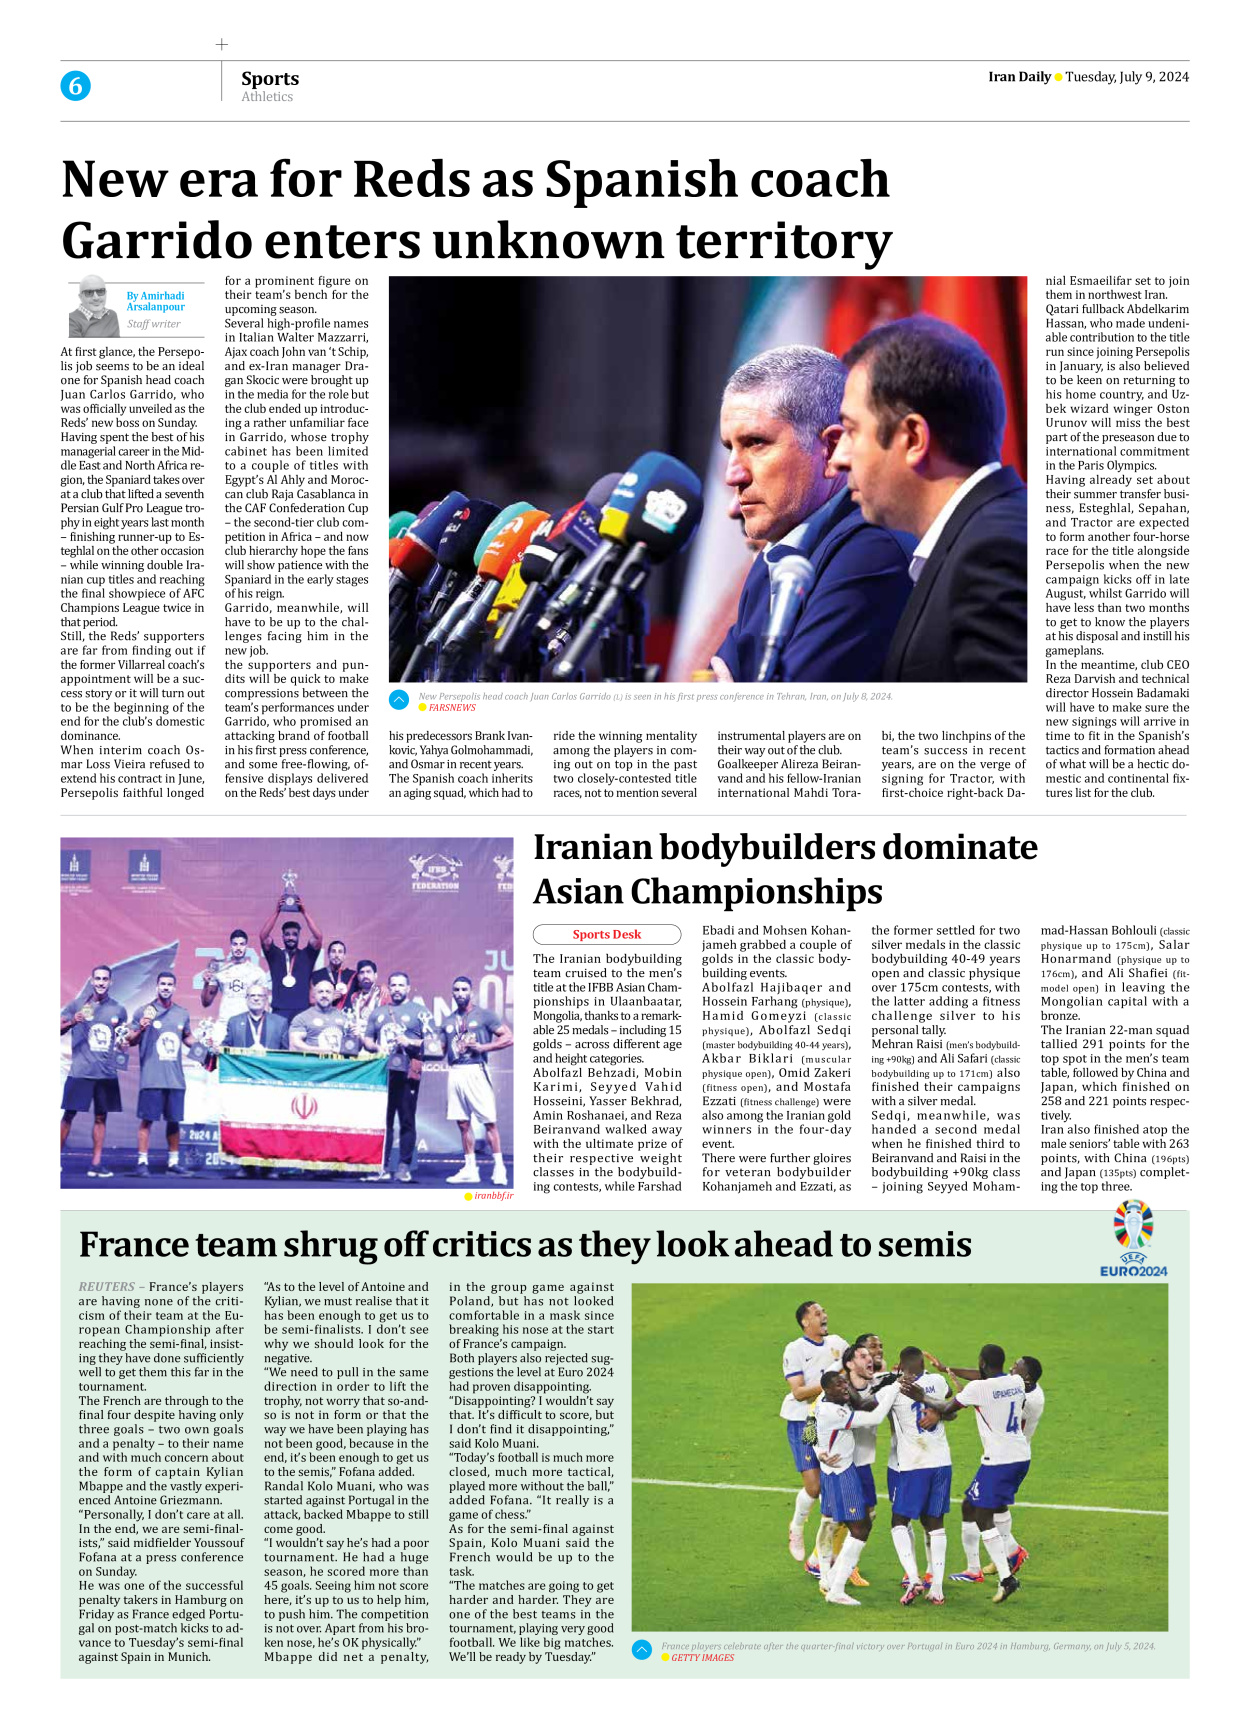 Iran Daily - Number Seven Thousand Six Hundred - 09 July 2024 - Page 6